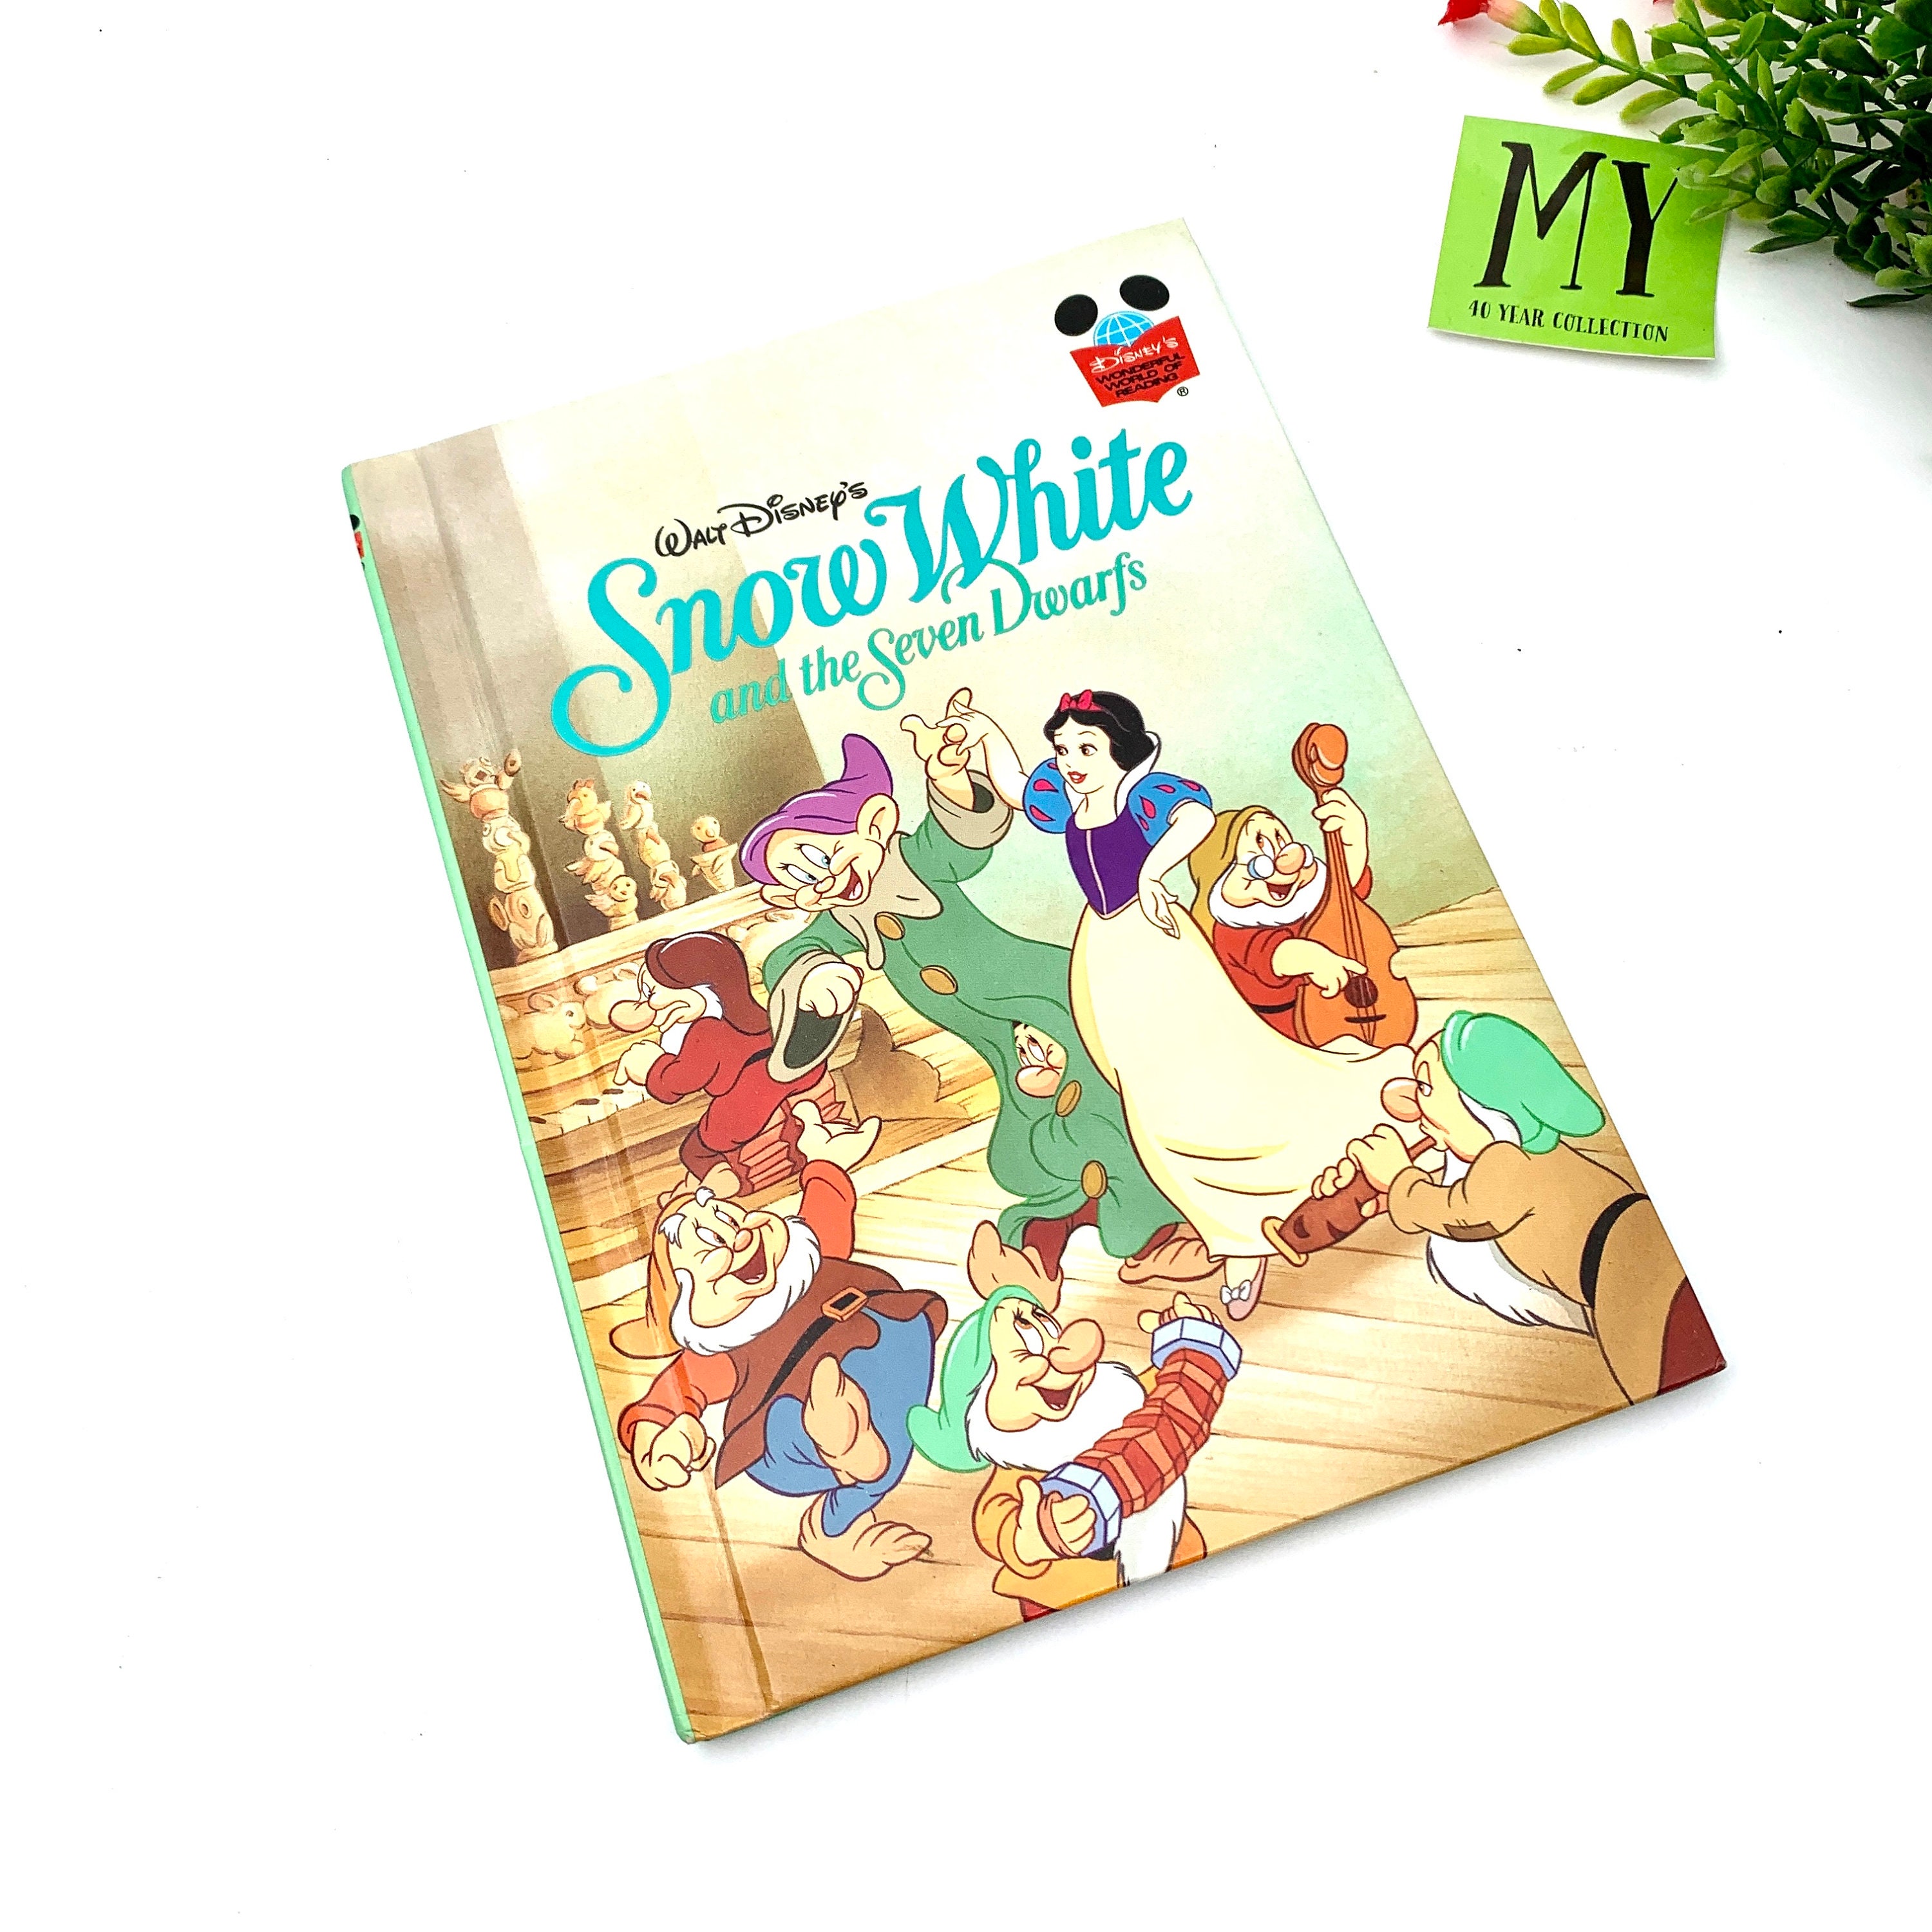 Walt Disney's Snow White and the Seven Dwarfs 1994 first edition